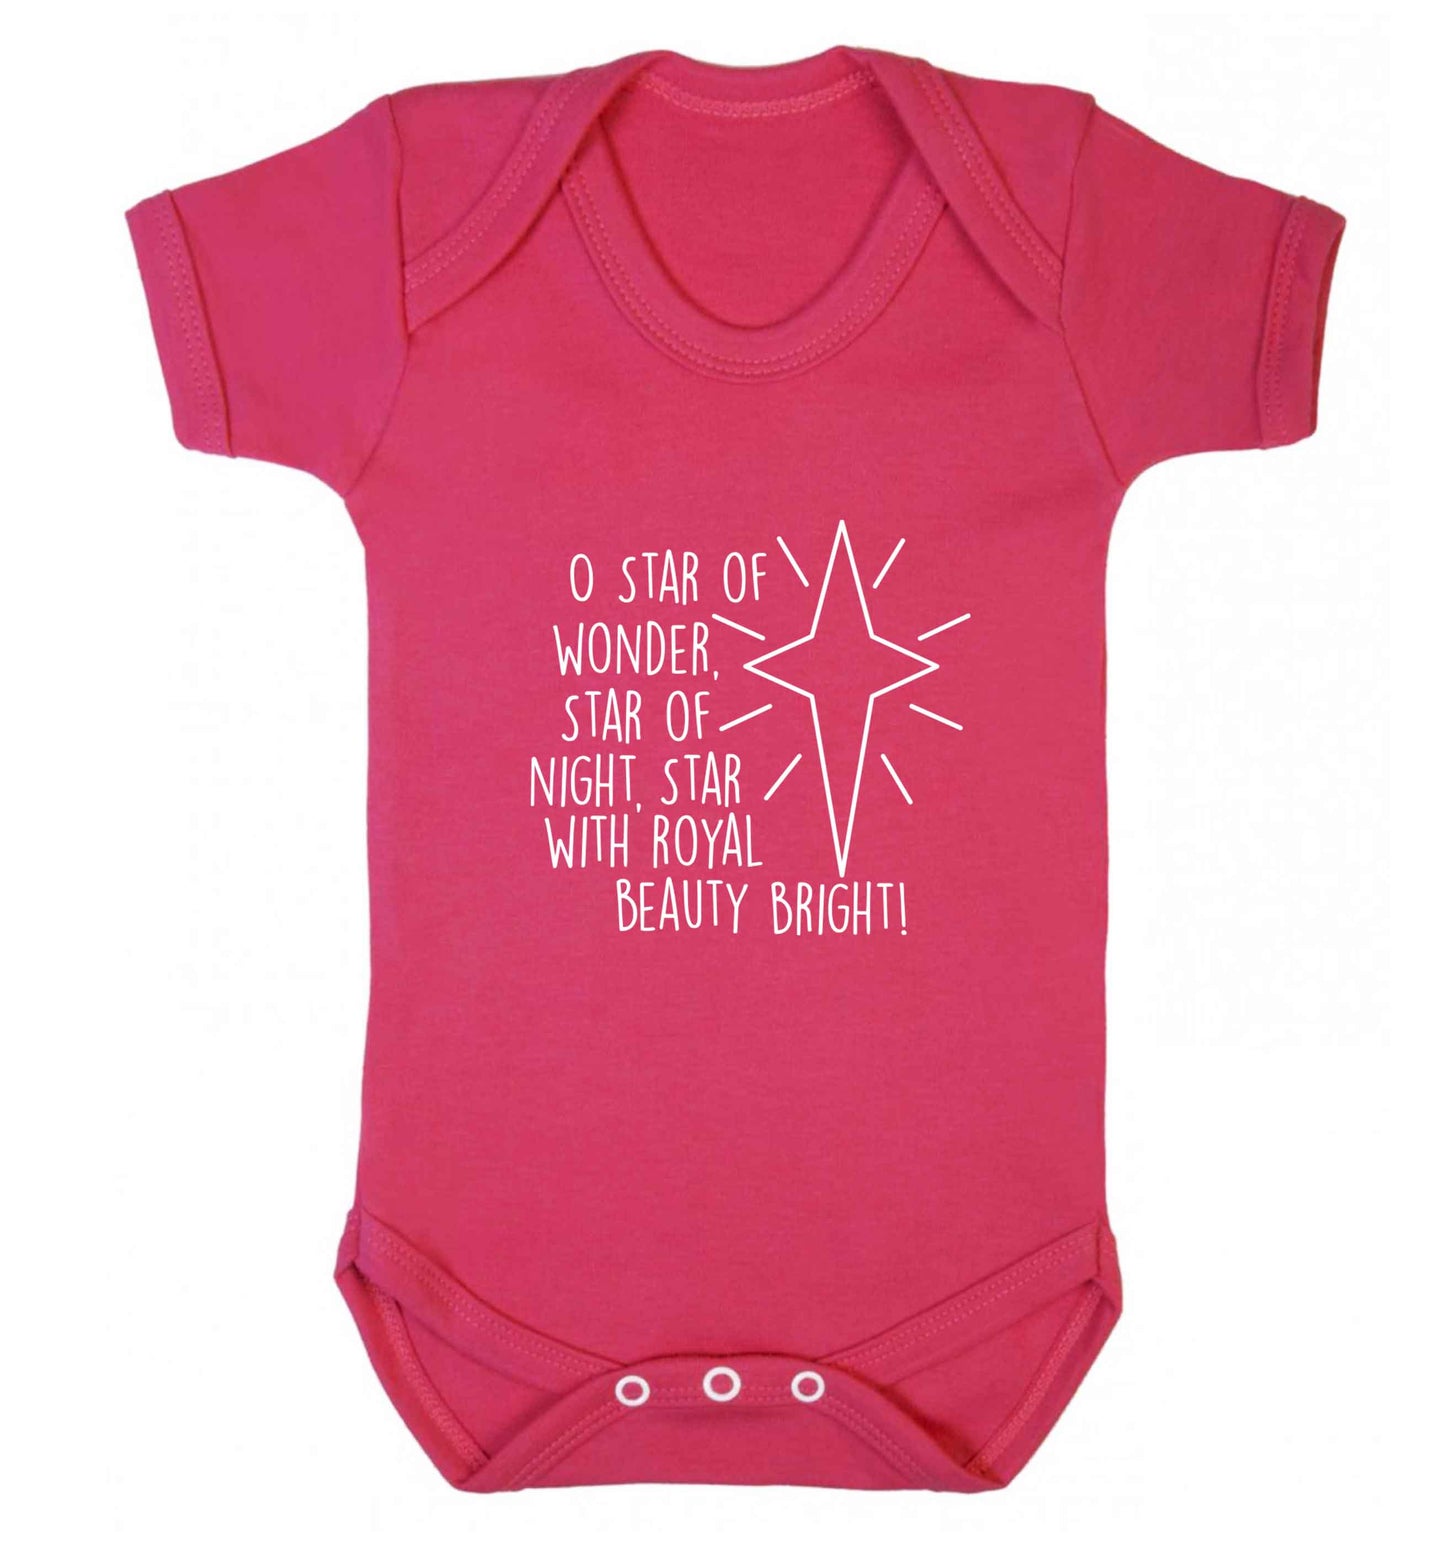 Oh star of wonder star of night, star with royal beauty bright baby vest dark pink 18-24 months